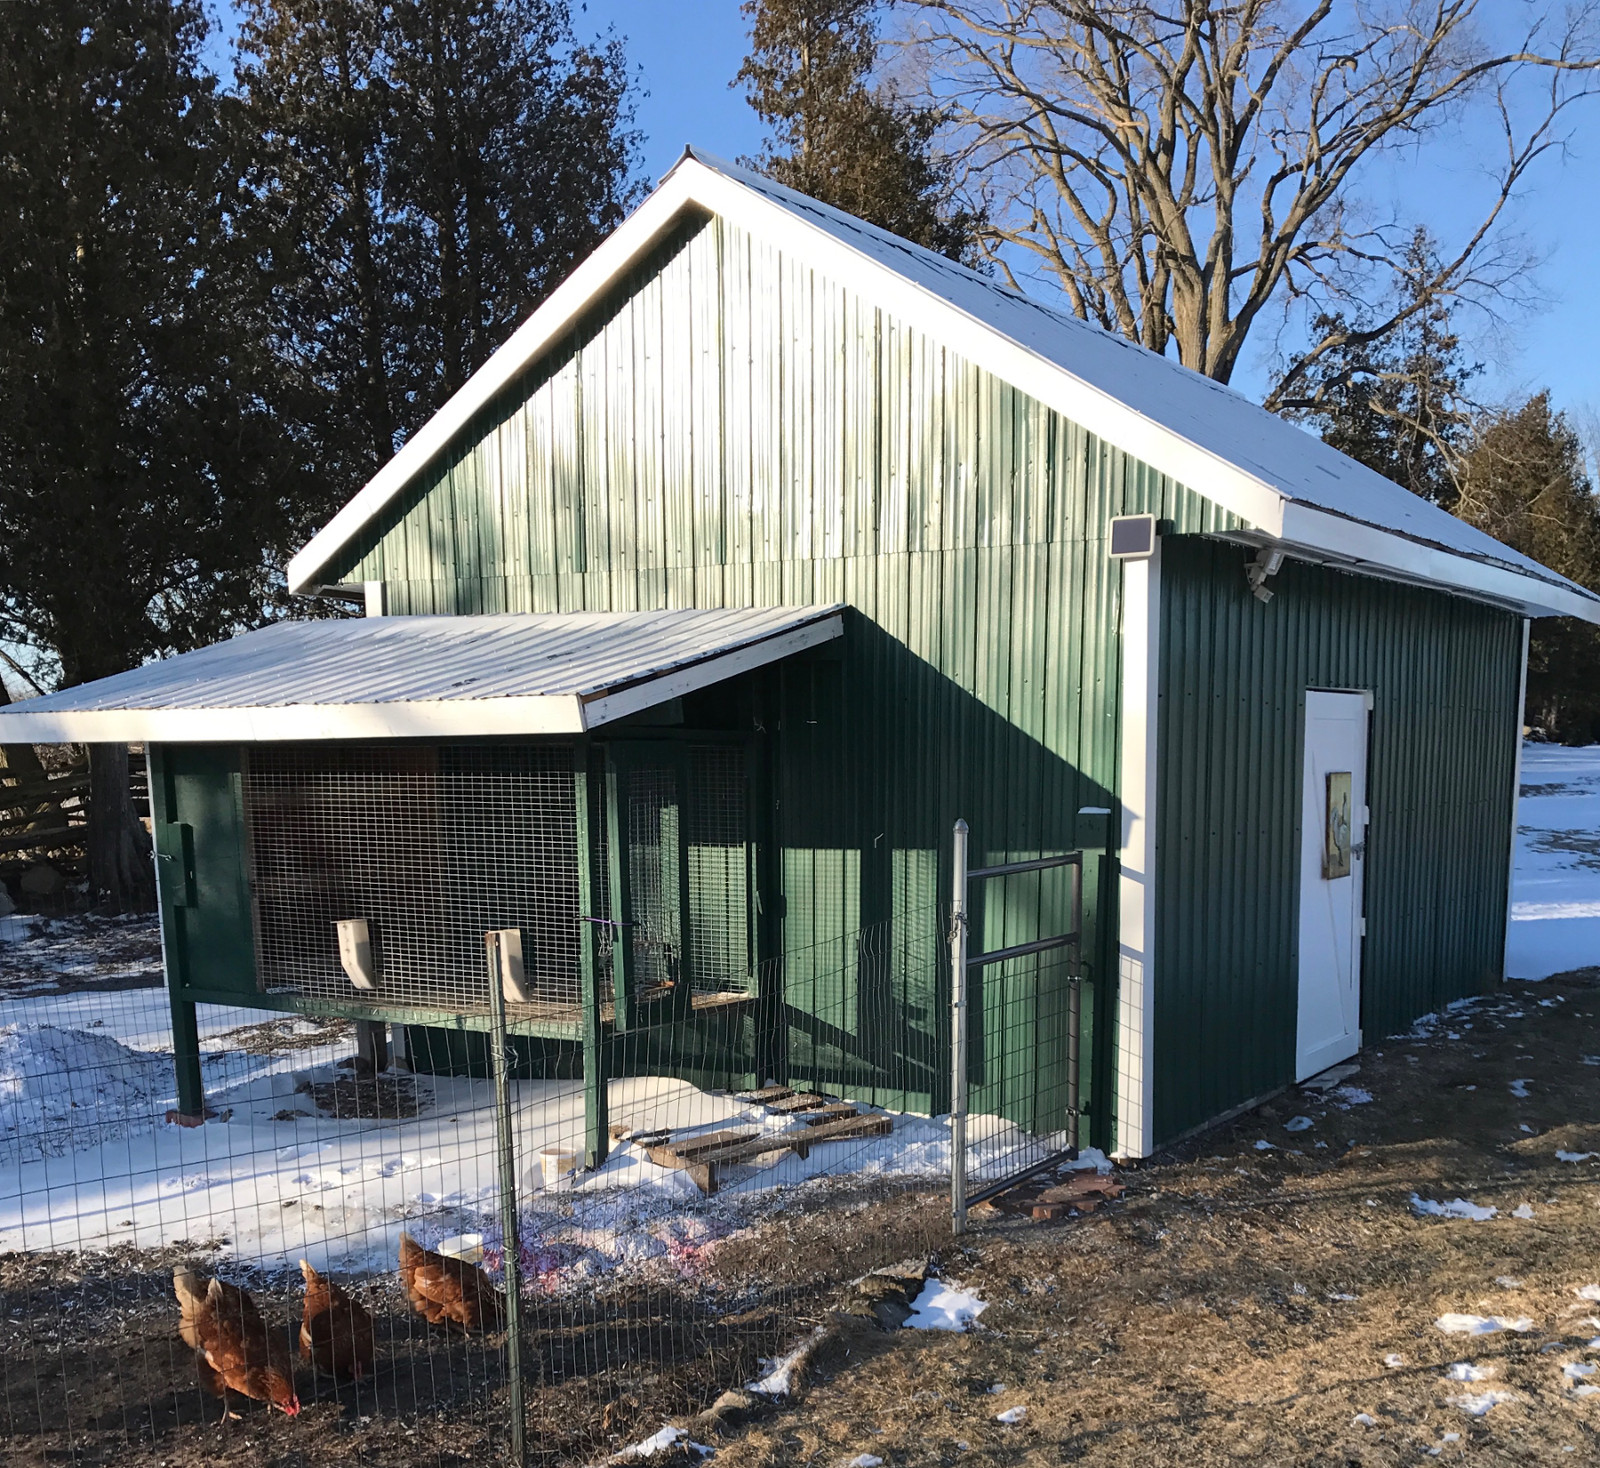 backyard chickens and their deluxe hen house